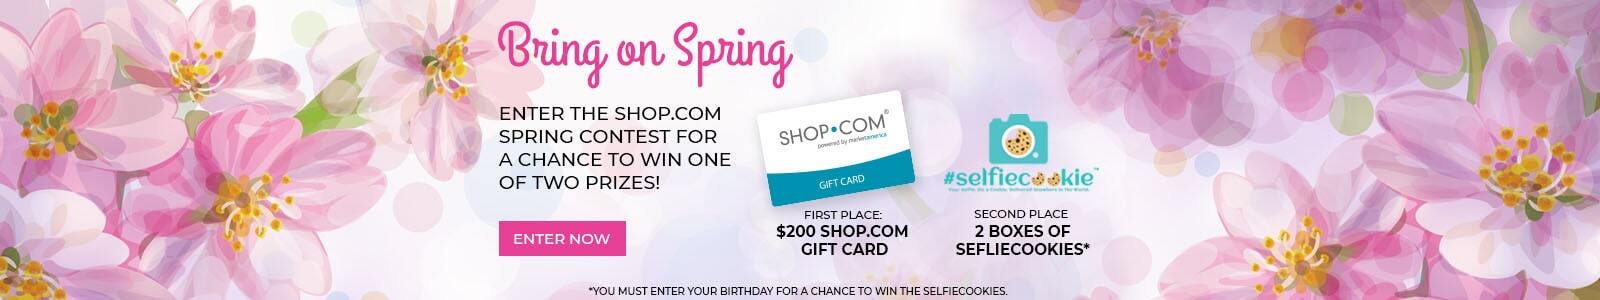 Sweepstakes and Contests - SHOP.COM